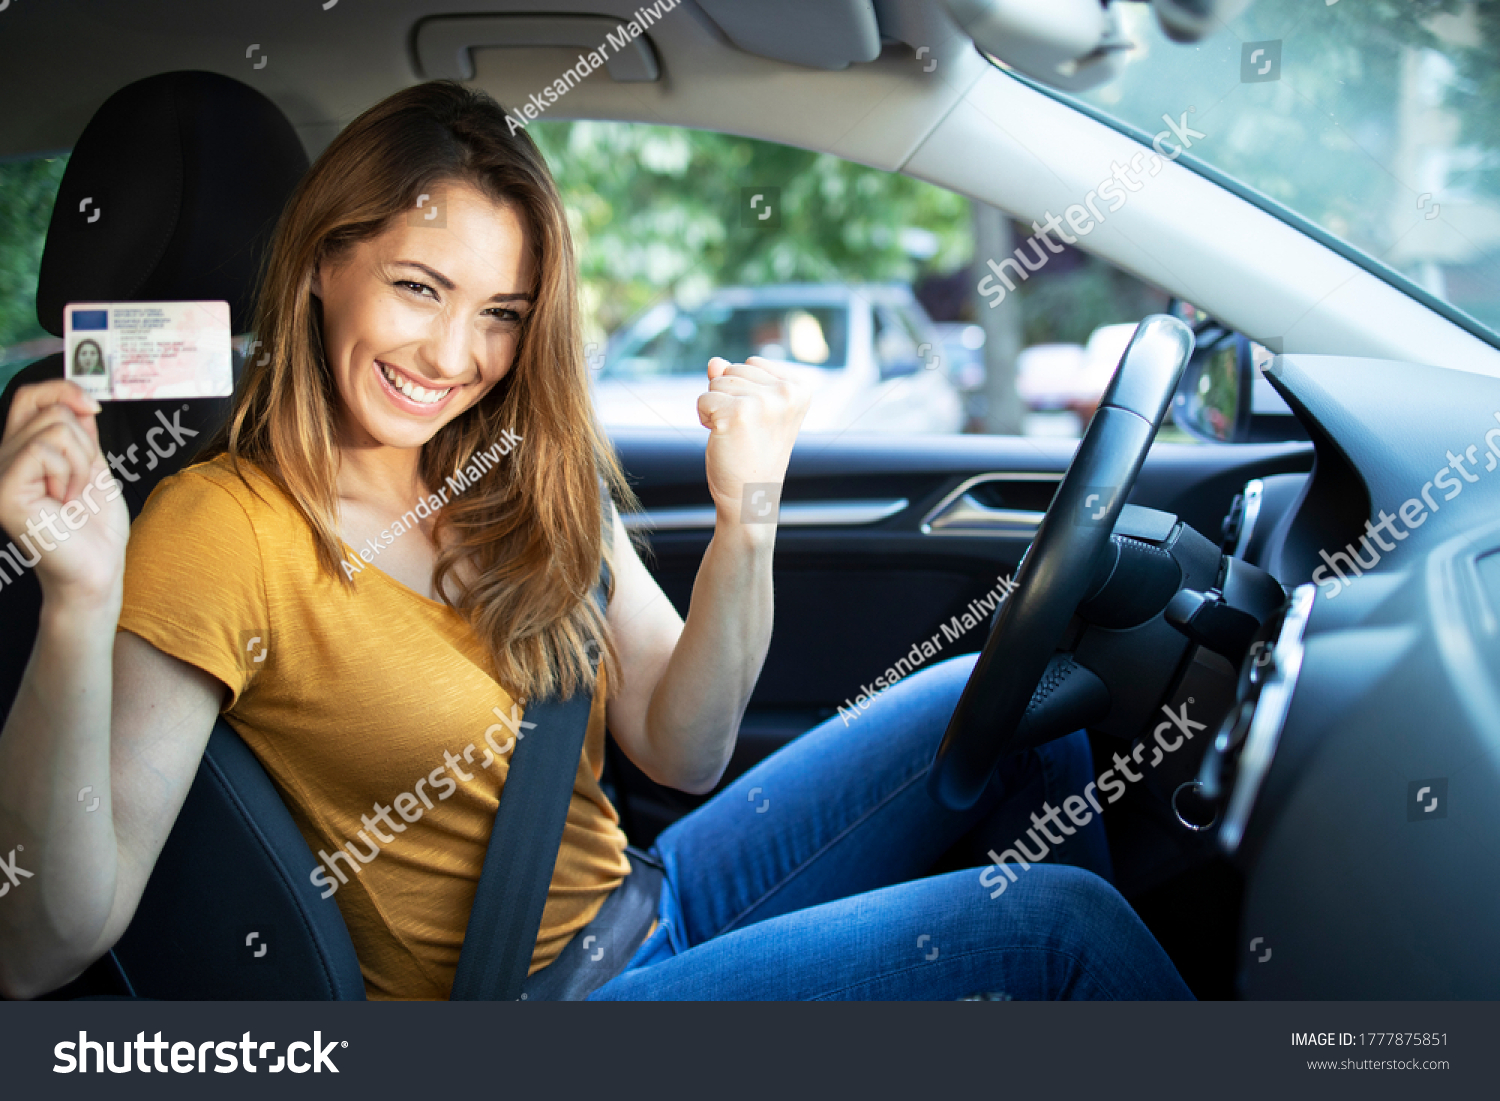 Car interior view of woman with driving license. Driving school. Young beautiful woman successfully passed driving school test. Female smiling and holding driver's license. #1777875851